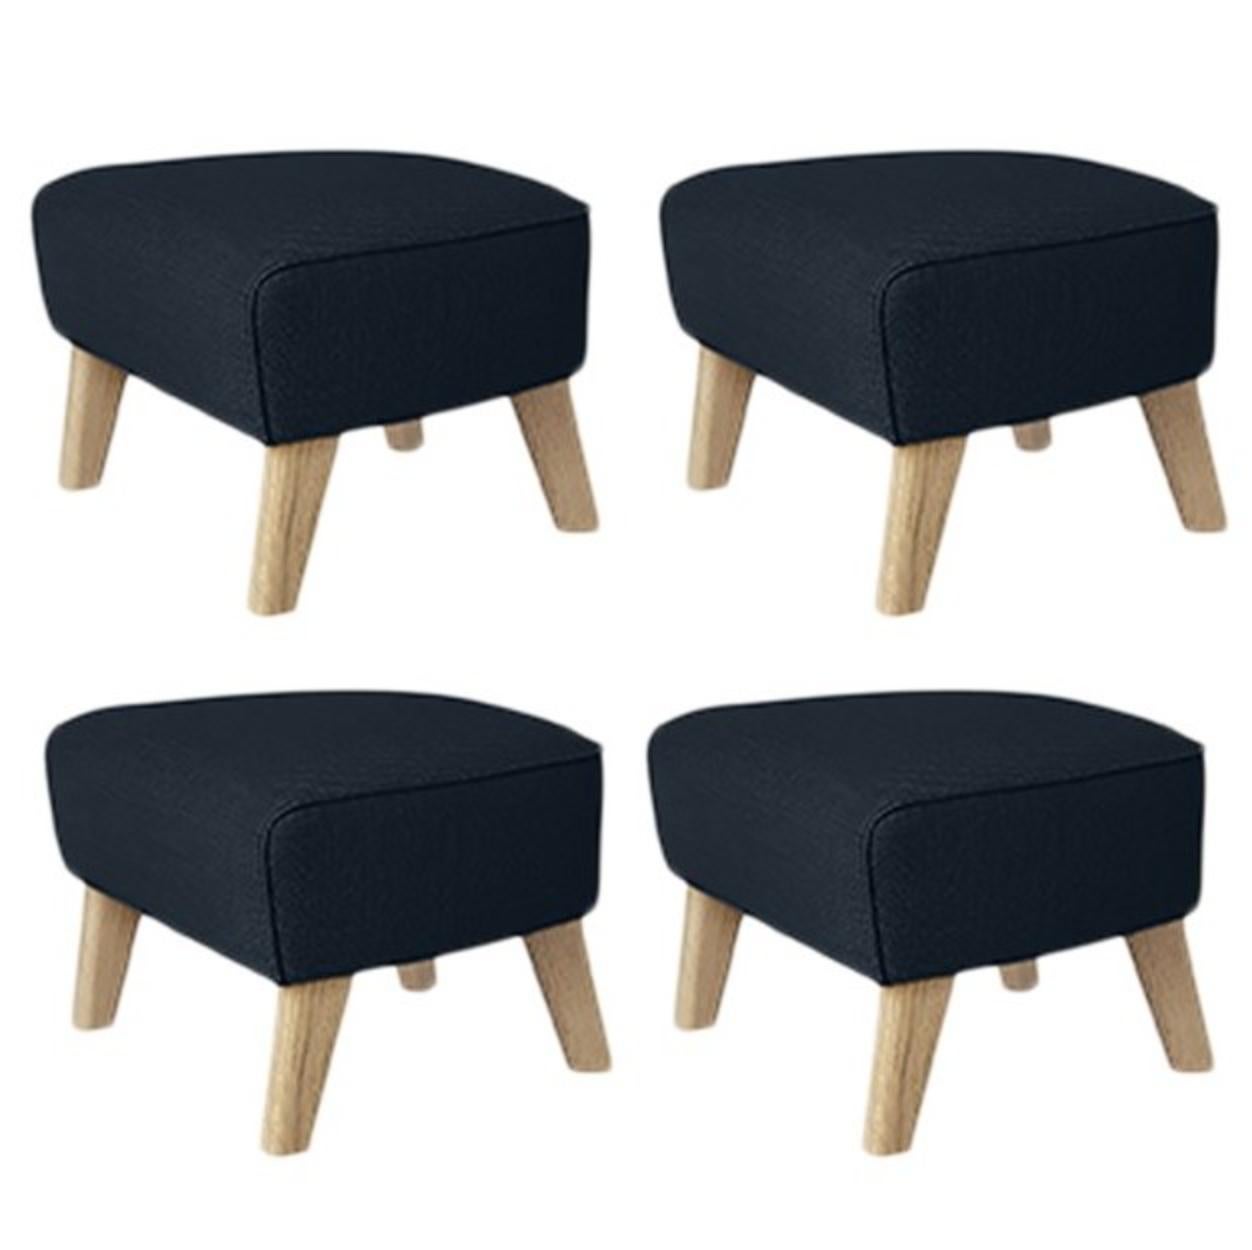 Set of 4 blue, natural oak Raf Simons Vidar 3 my own chair footstools by Lassen
Dimensions: w 56 x d 58 x h 40 cm 
Materials: Textile
Also available: Other colors available

The my own chair footstool has been designed in the same spirit as